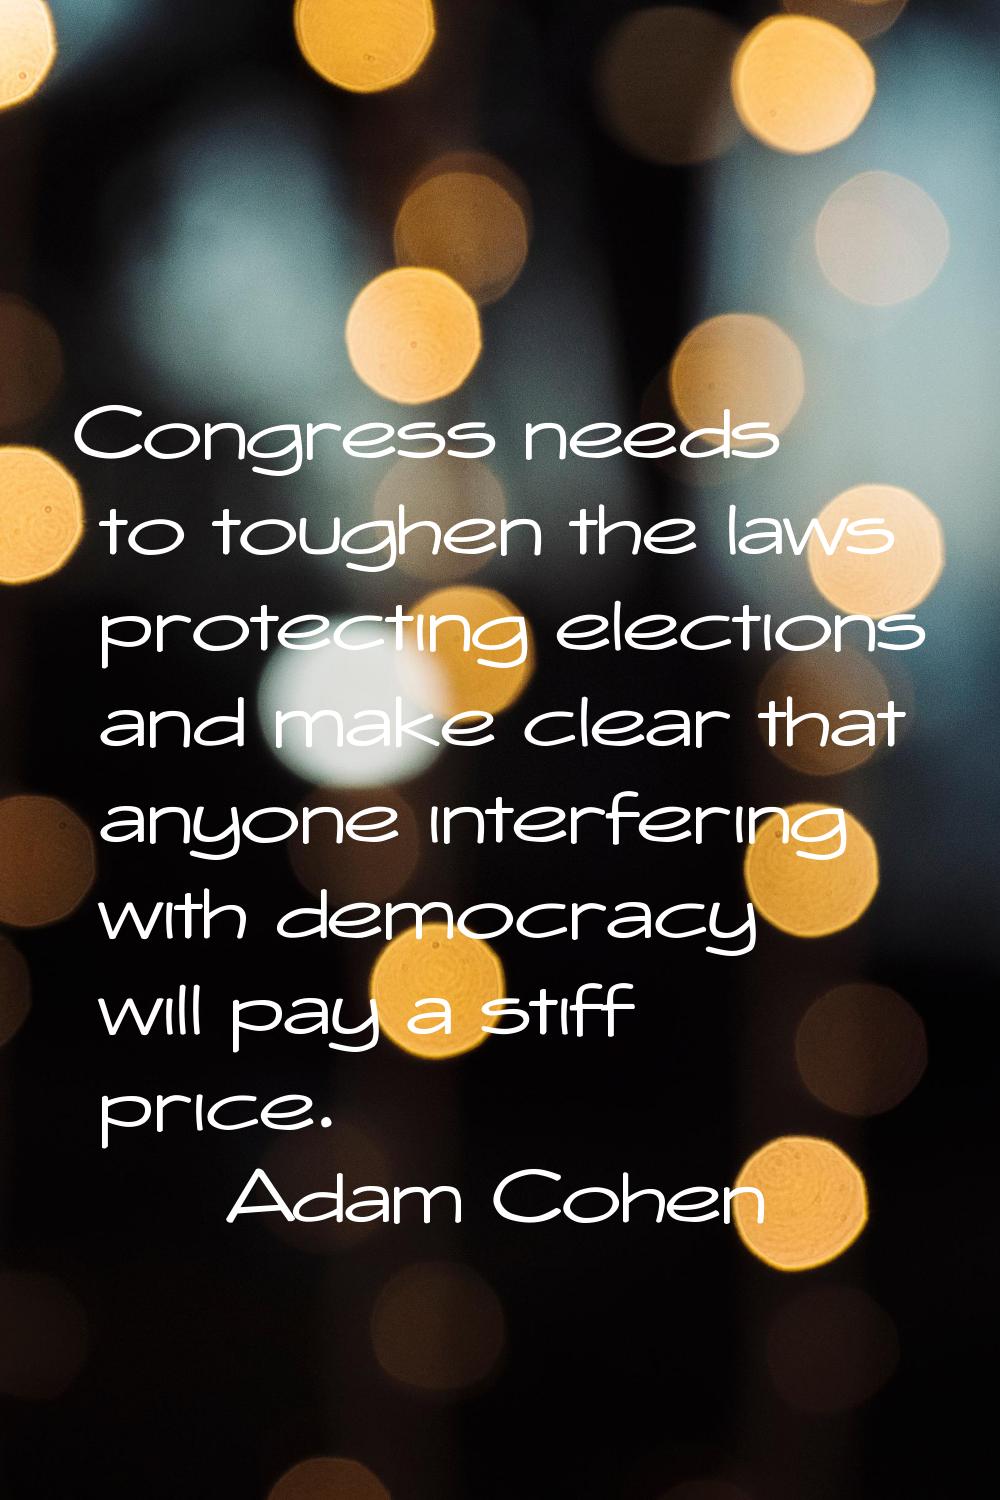 Congress needs to toughen the laws protecting elections and make clear that anyone interfering with